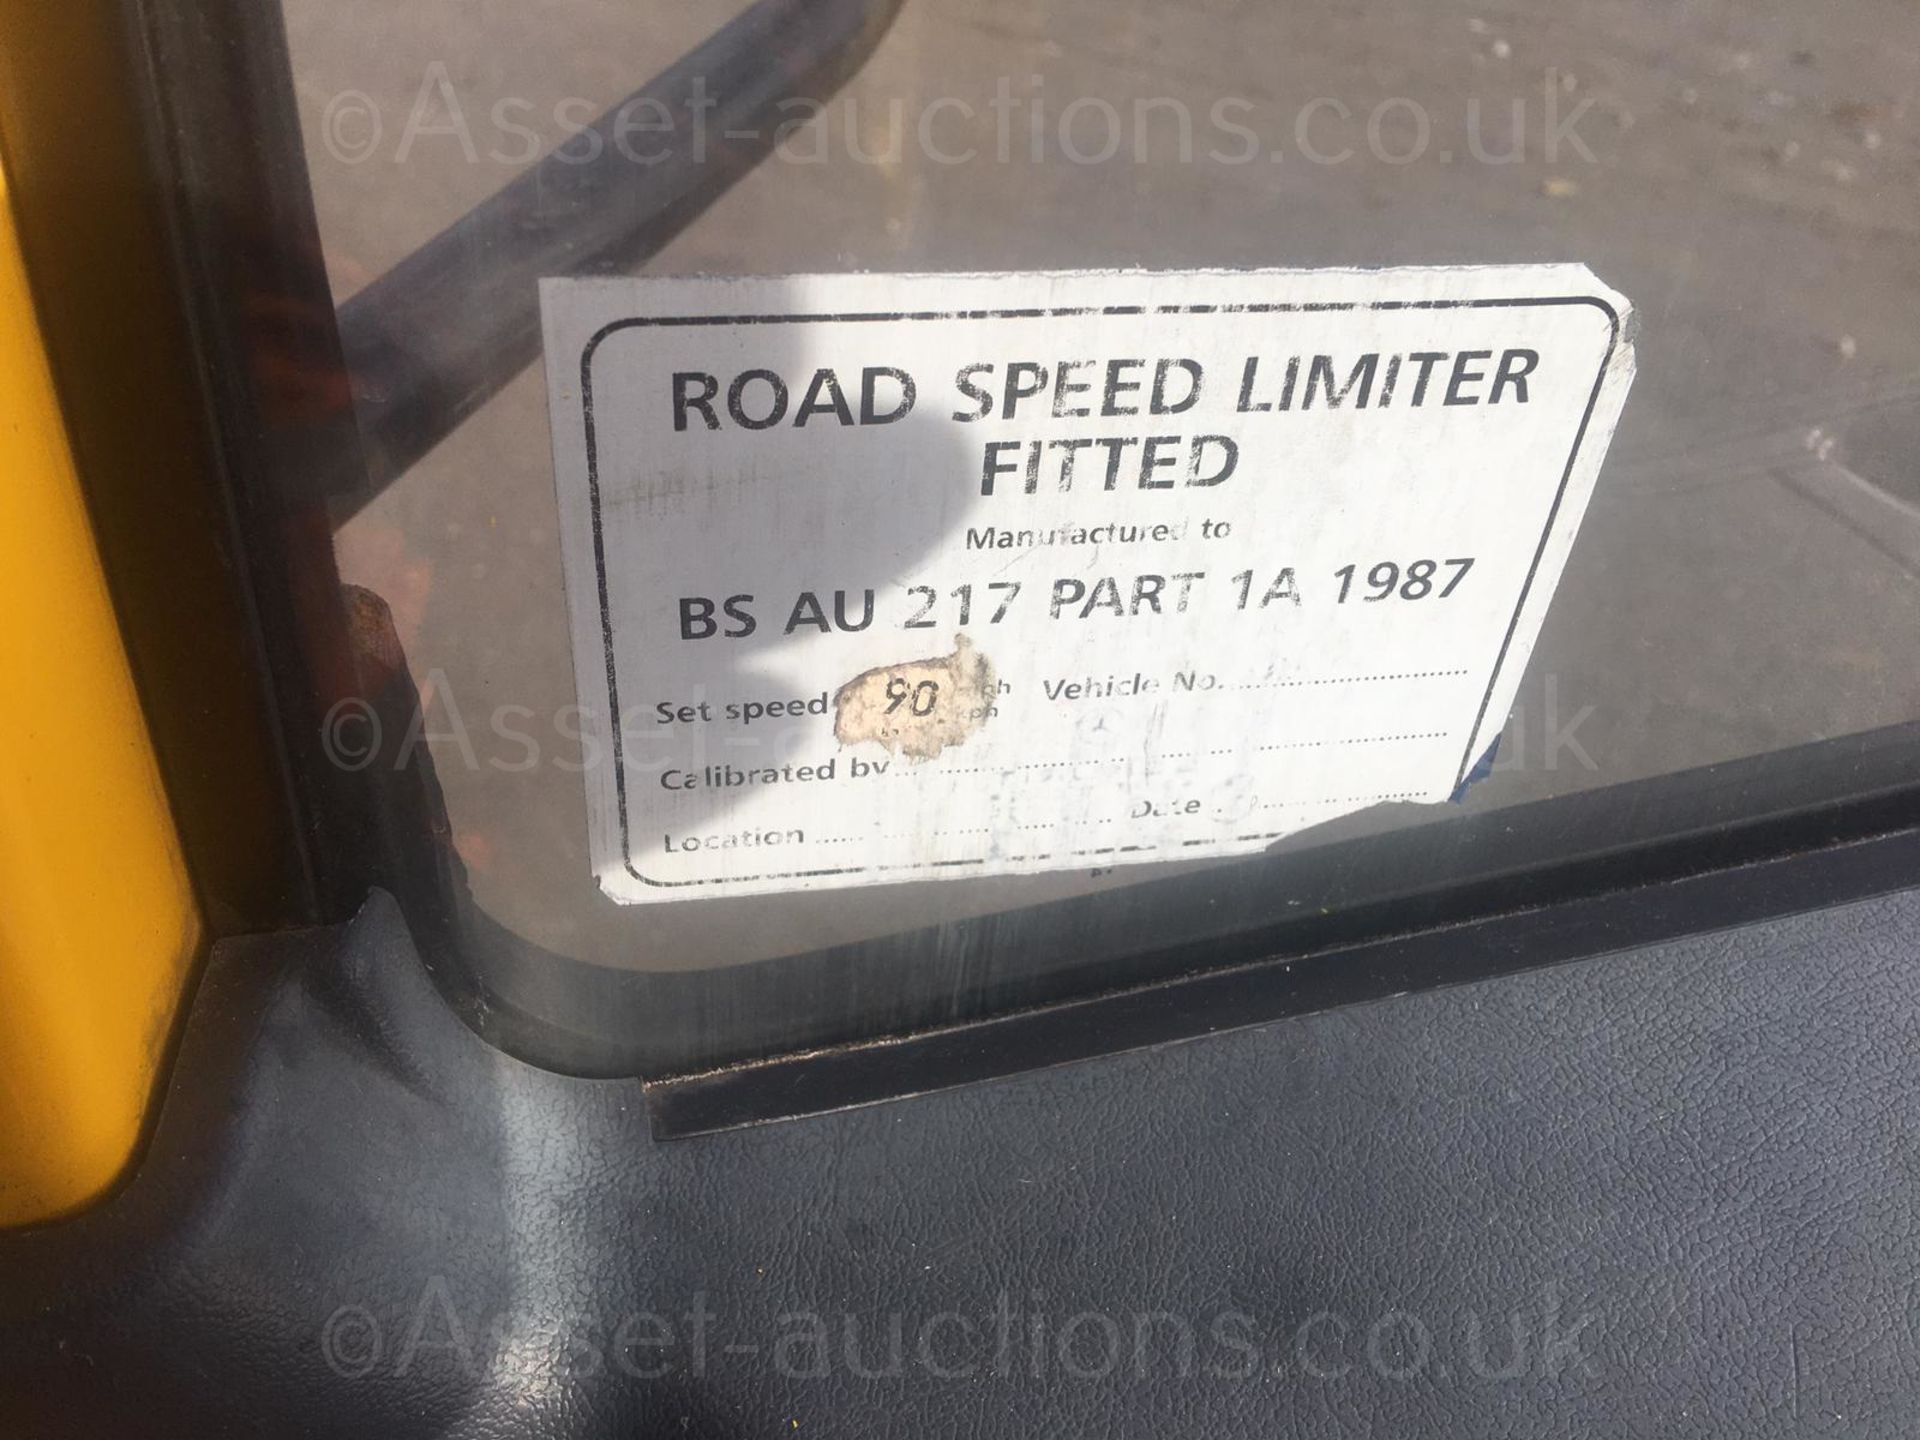 2004/54 REG MERCEDES ATEGO 1018 DAY YELLOW DROPSIDE LINE PAINTING LORRY 4.3L DIESEL ENGINE *NO VAT* - Image 31 of 62